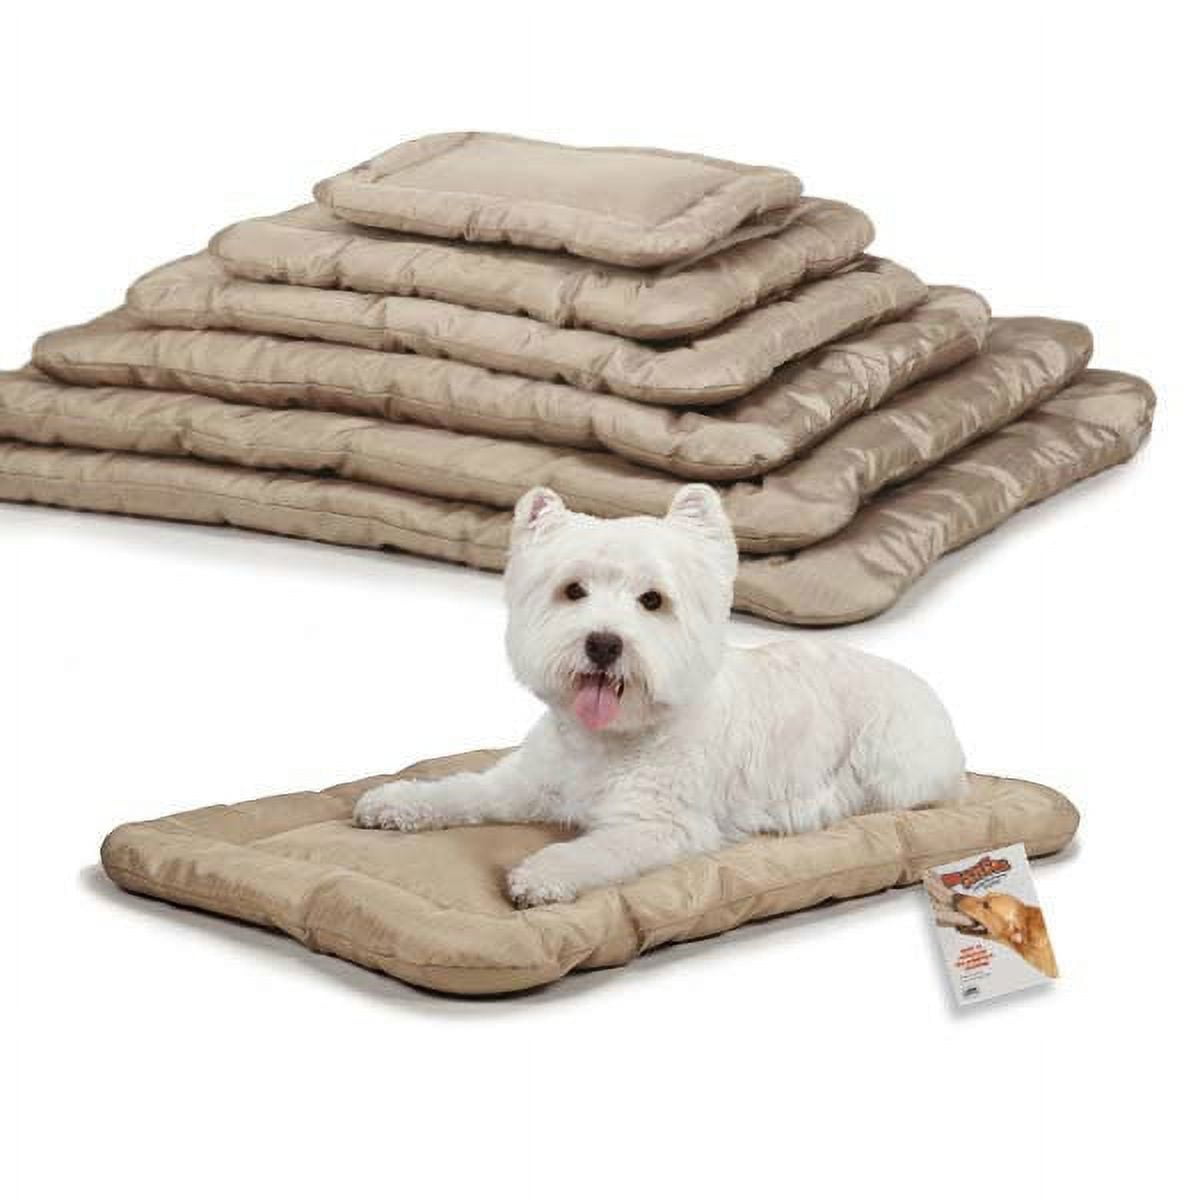 Chew Resistant Dog Bed With 200 Day Guarantee